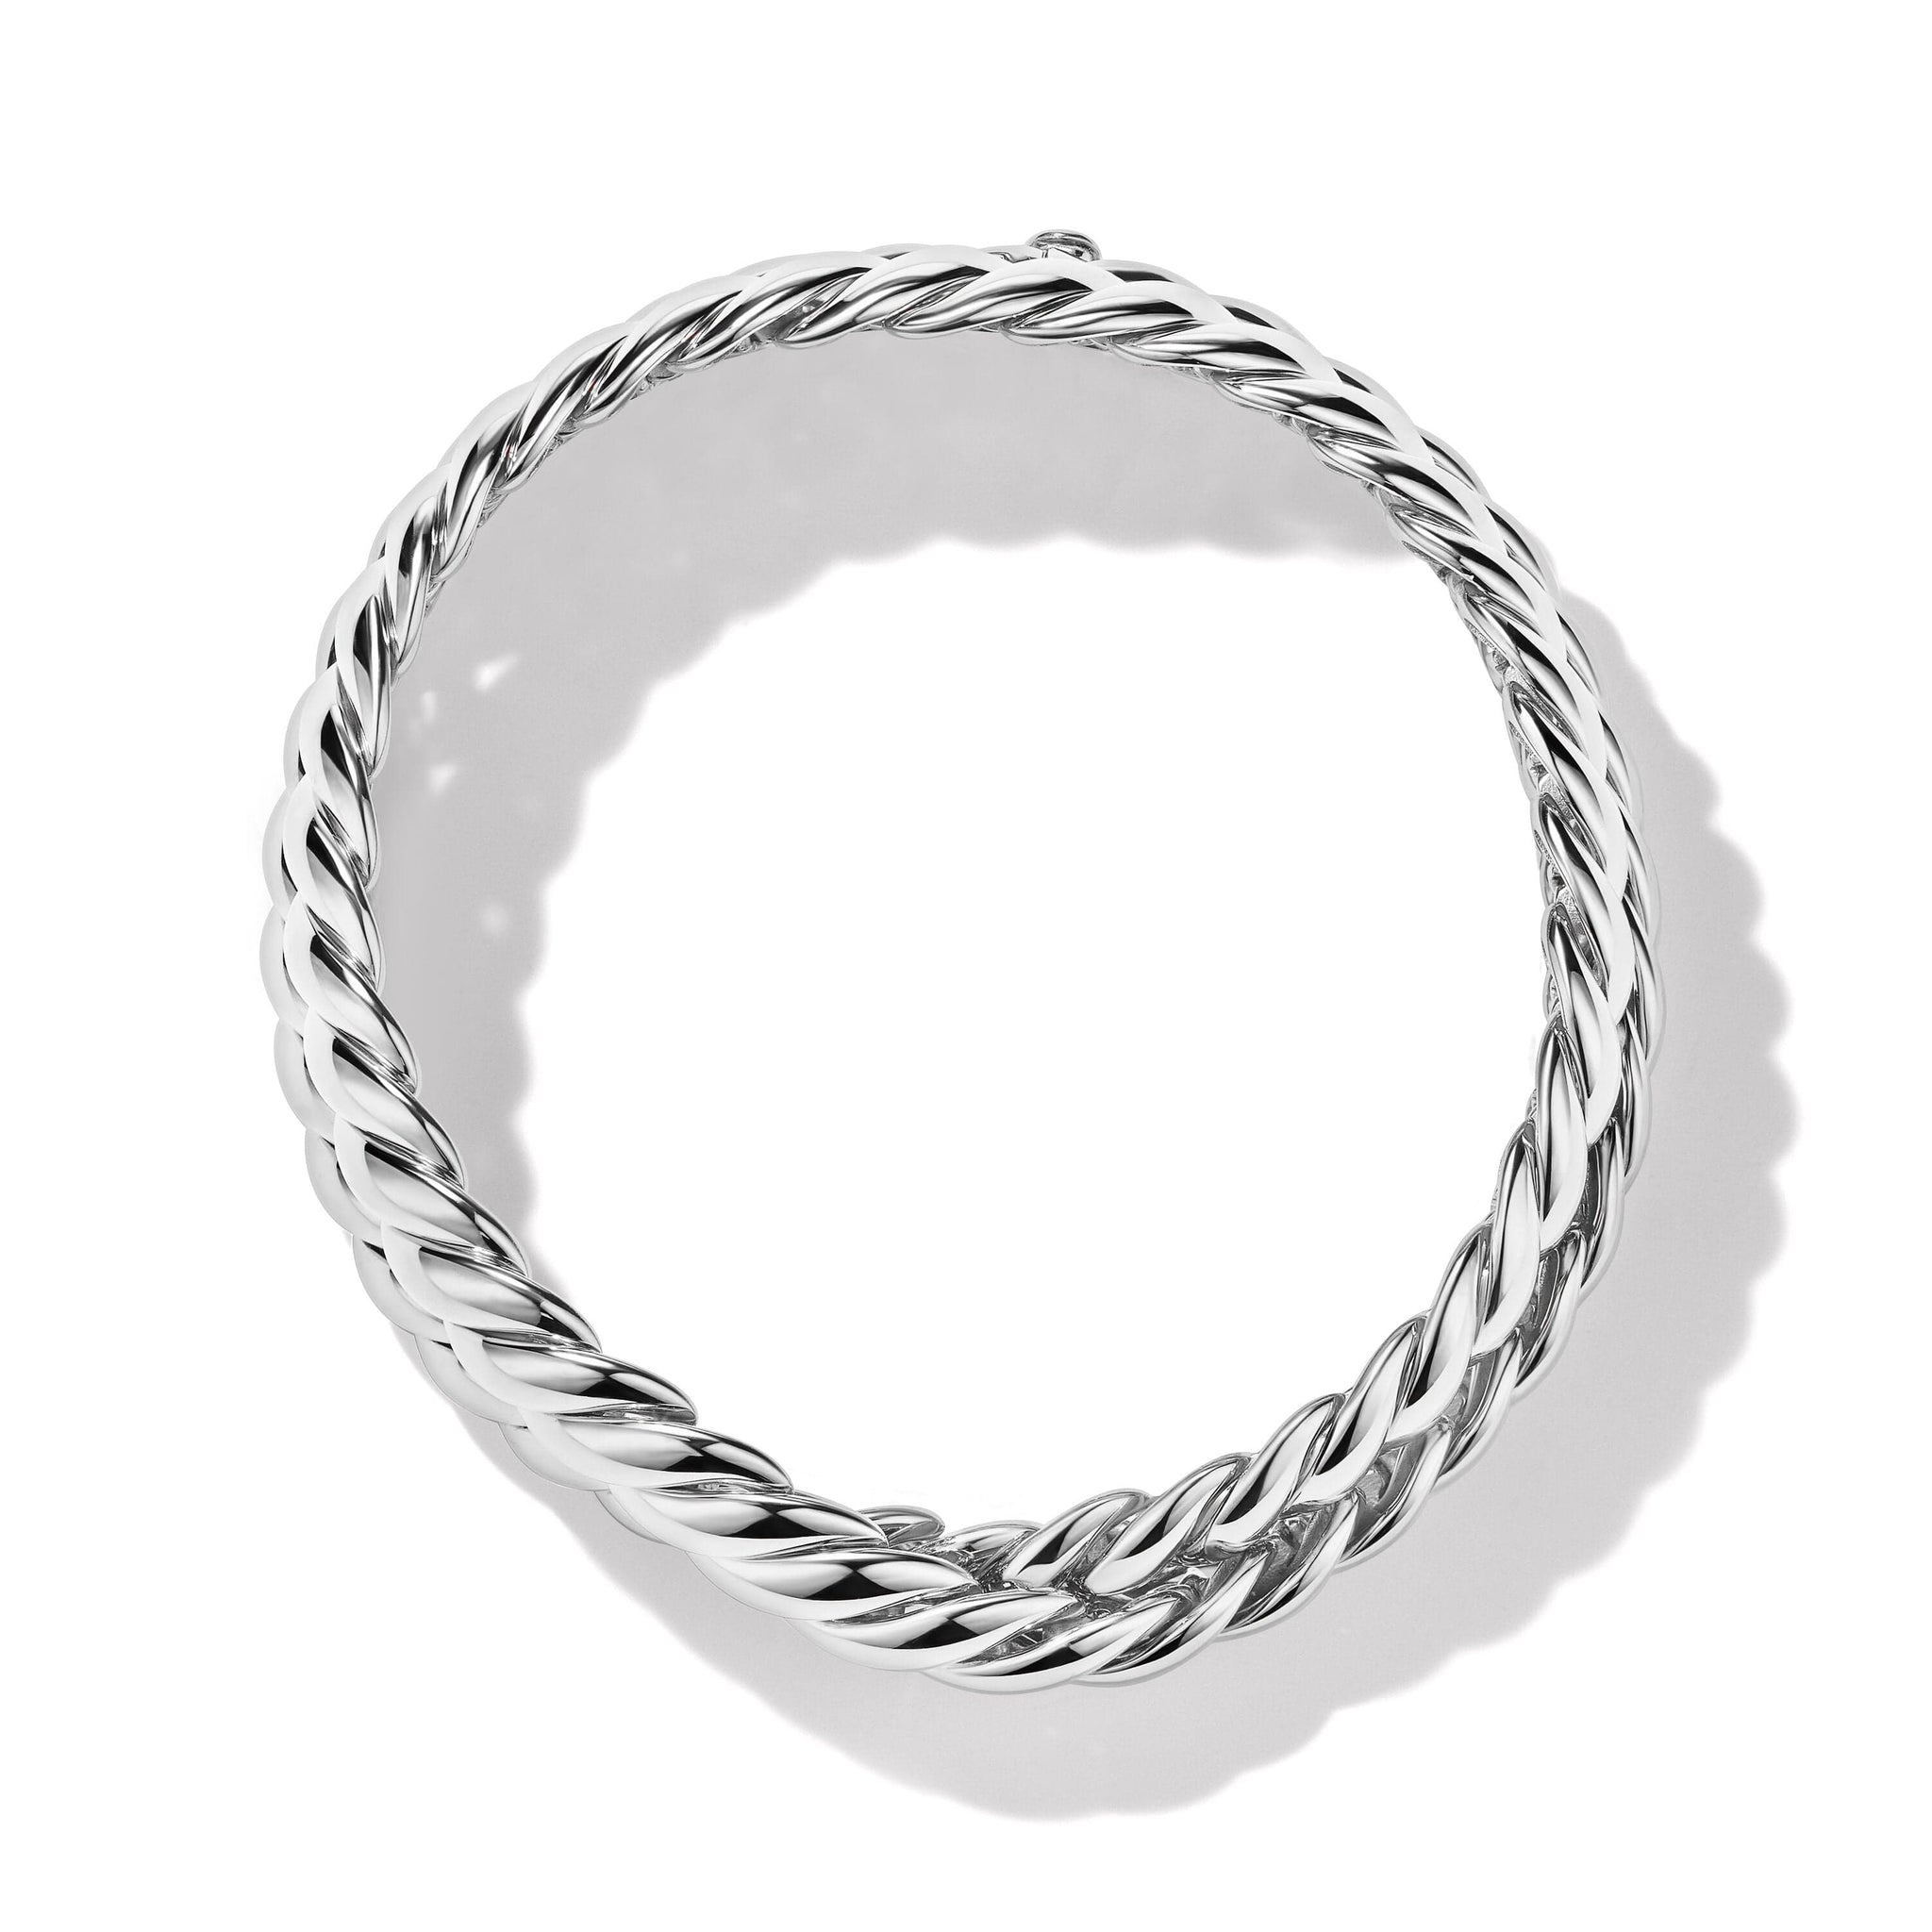 Sculpted Cable Double Wrap Bracelet in Sterling Silver